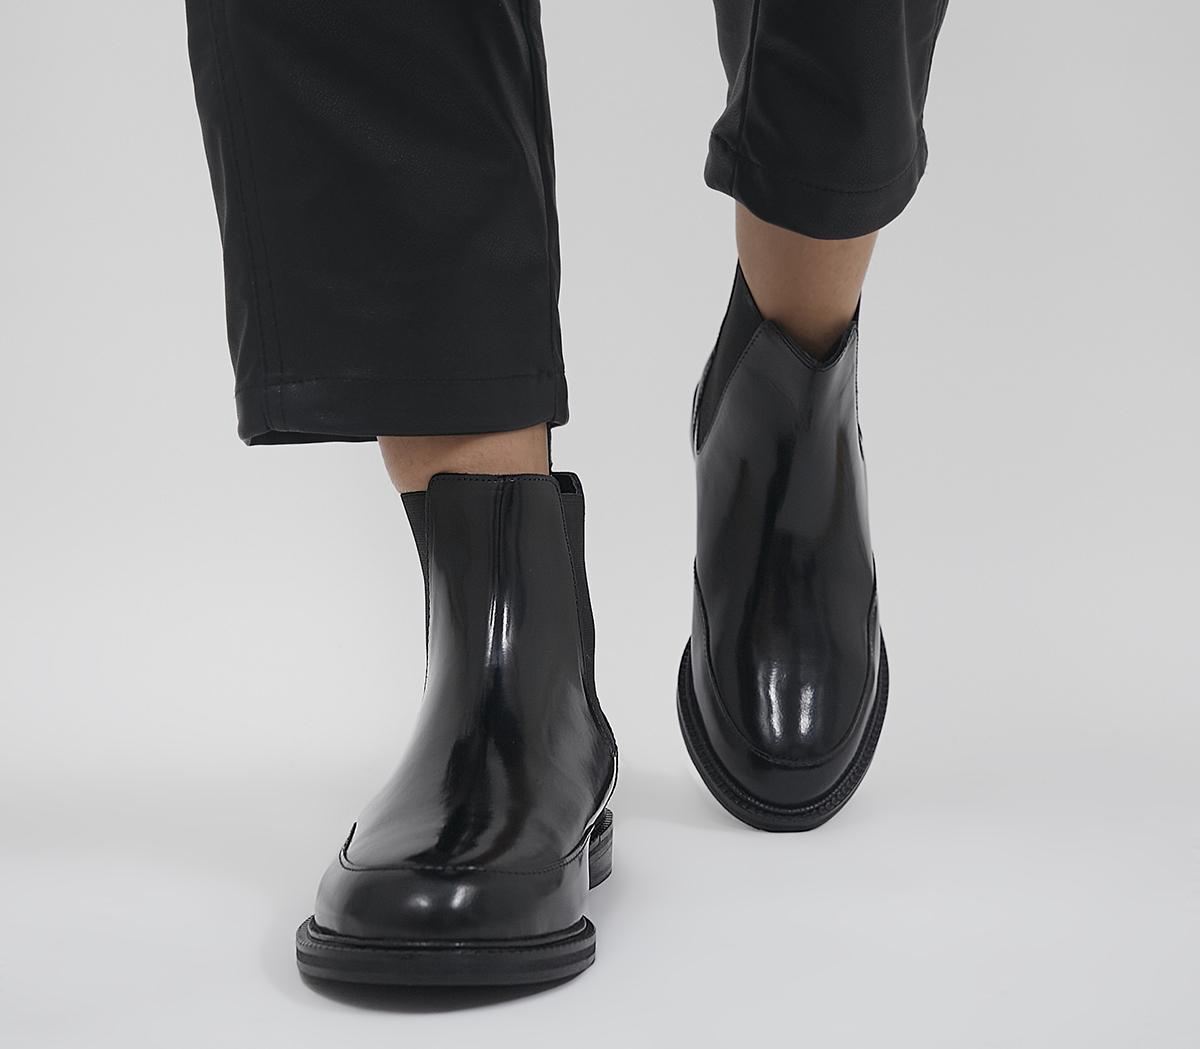 OfficeAngelos Clean Chelsea BootsBlack Shiny Box Leather